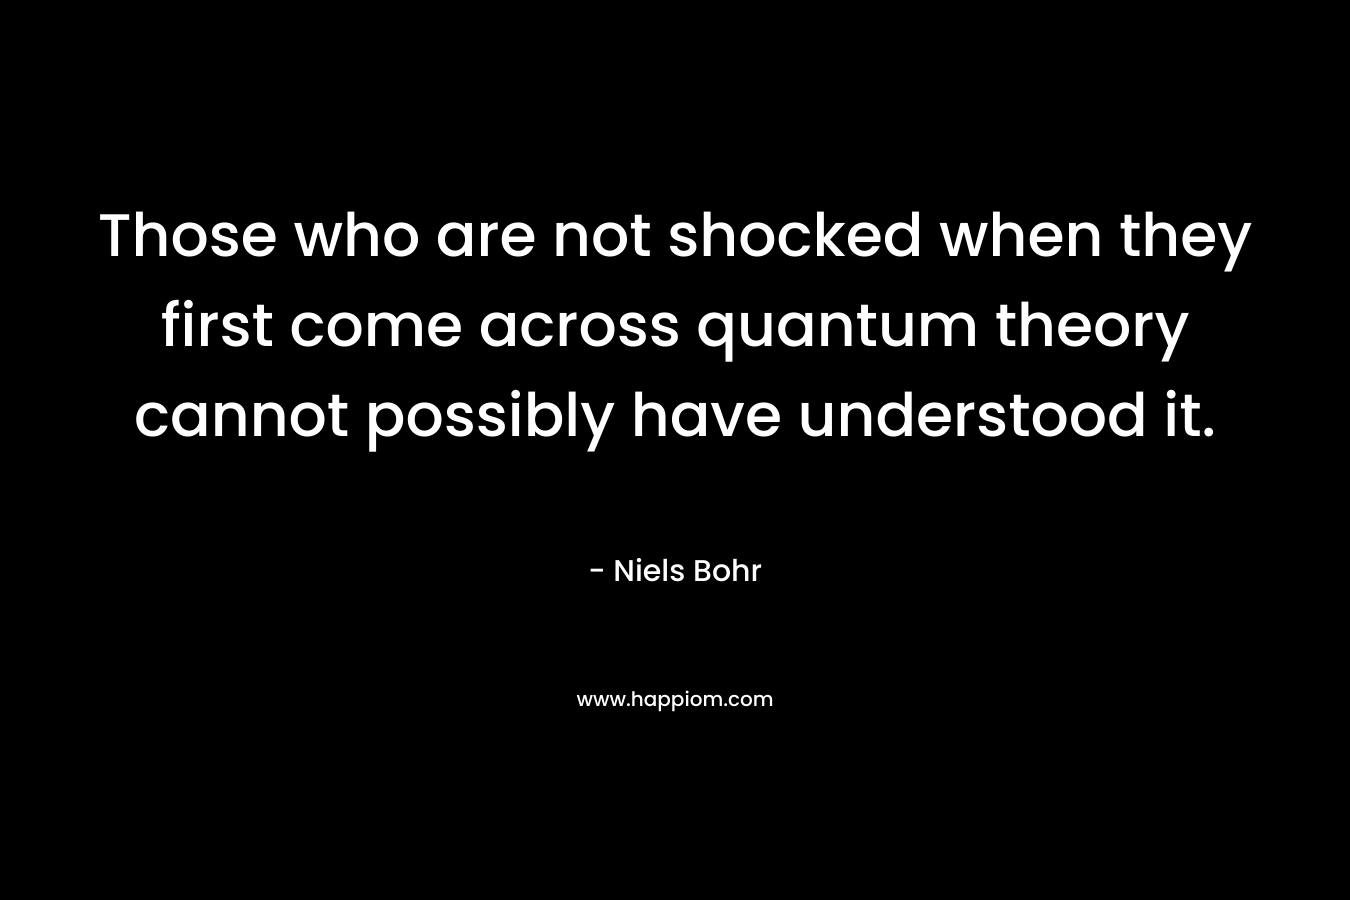 Those who are not shocked when they first come across quantum theory cannot possibly have understood it.